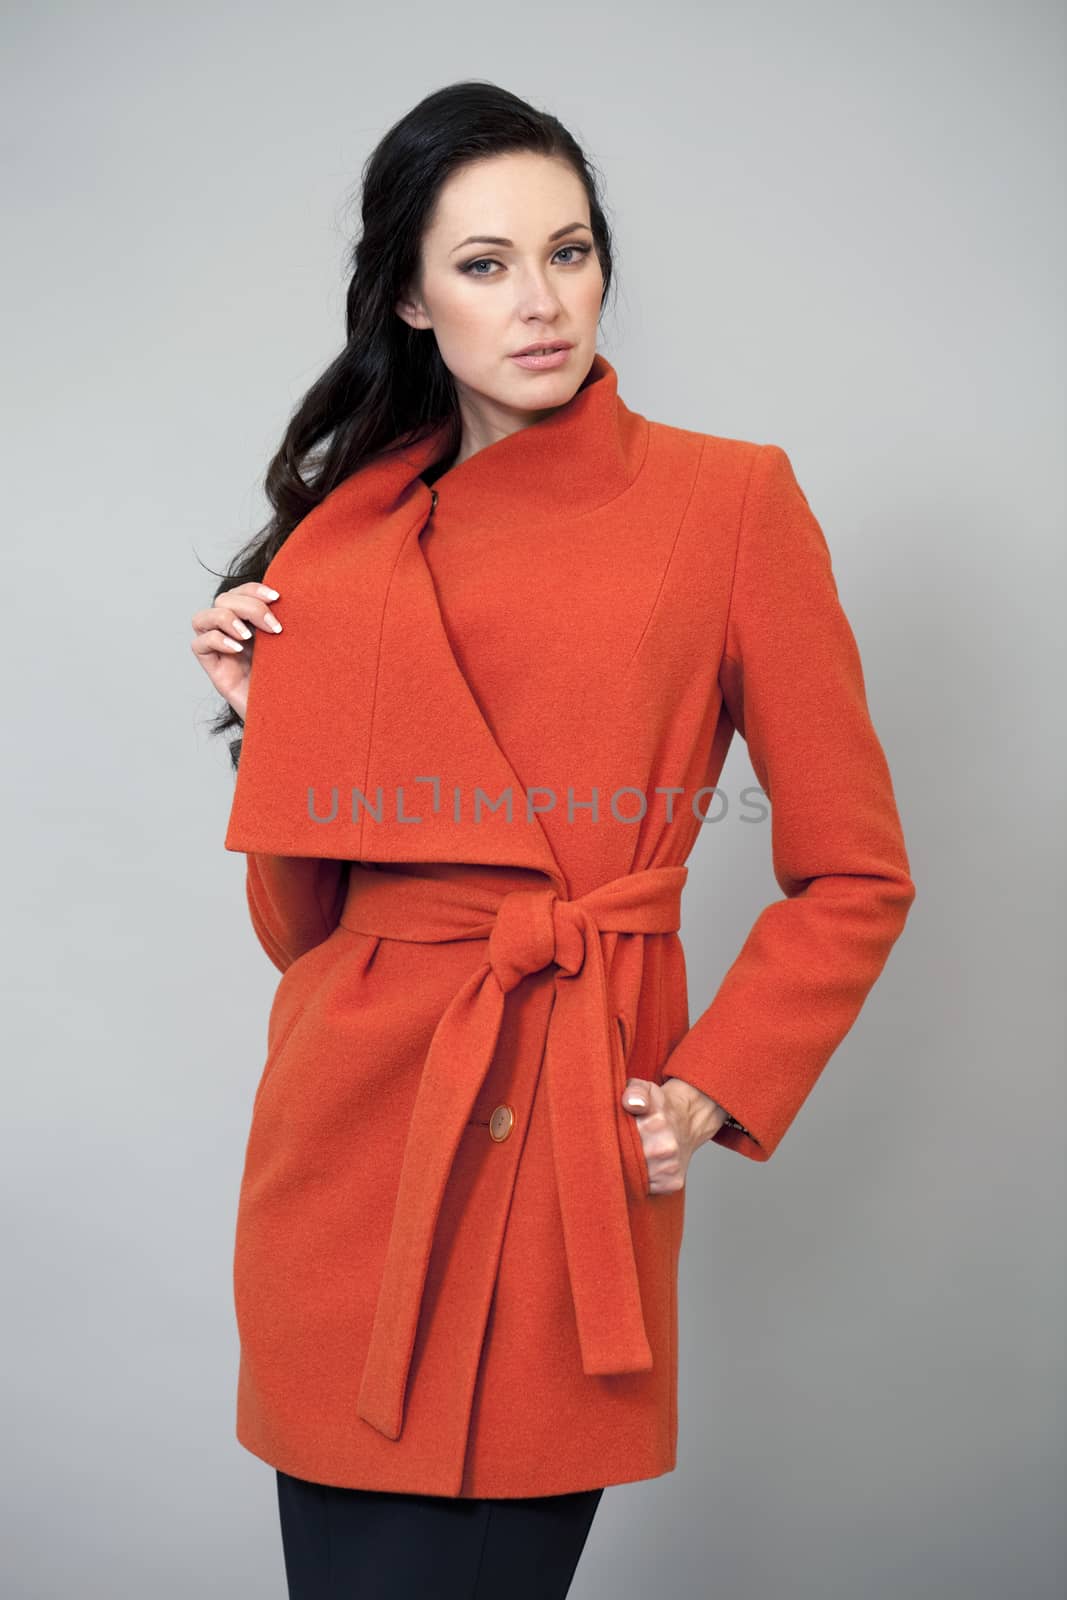 Young woman in a bright orange coat by andersonrise